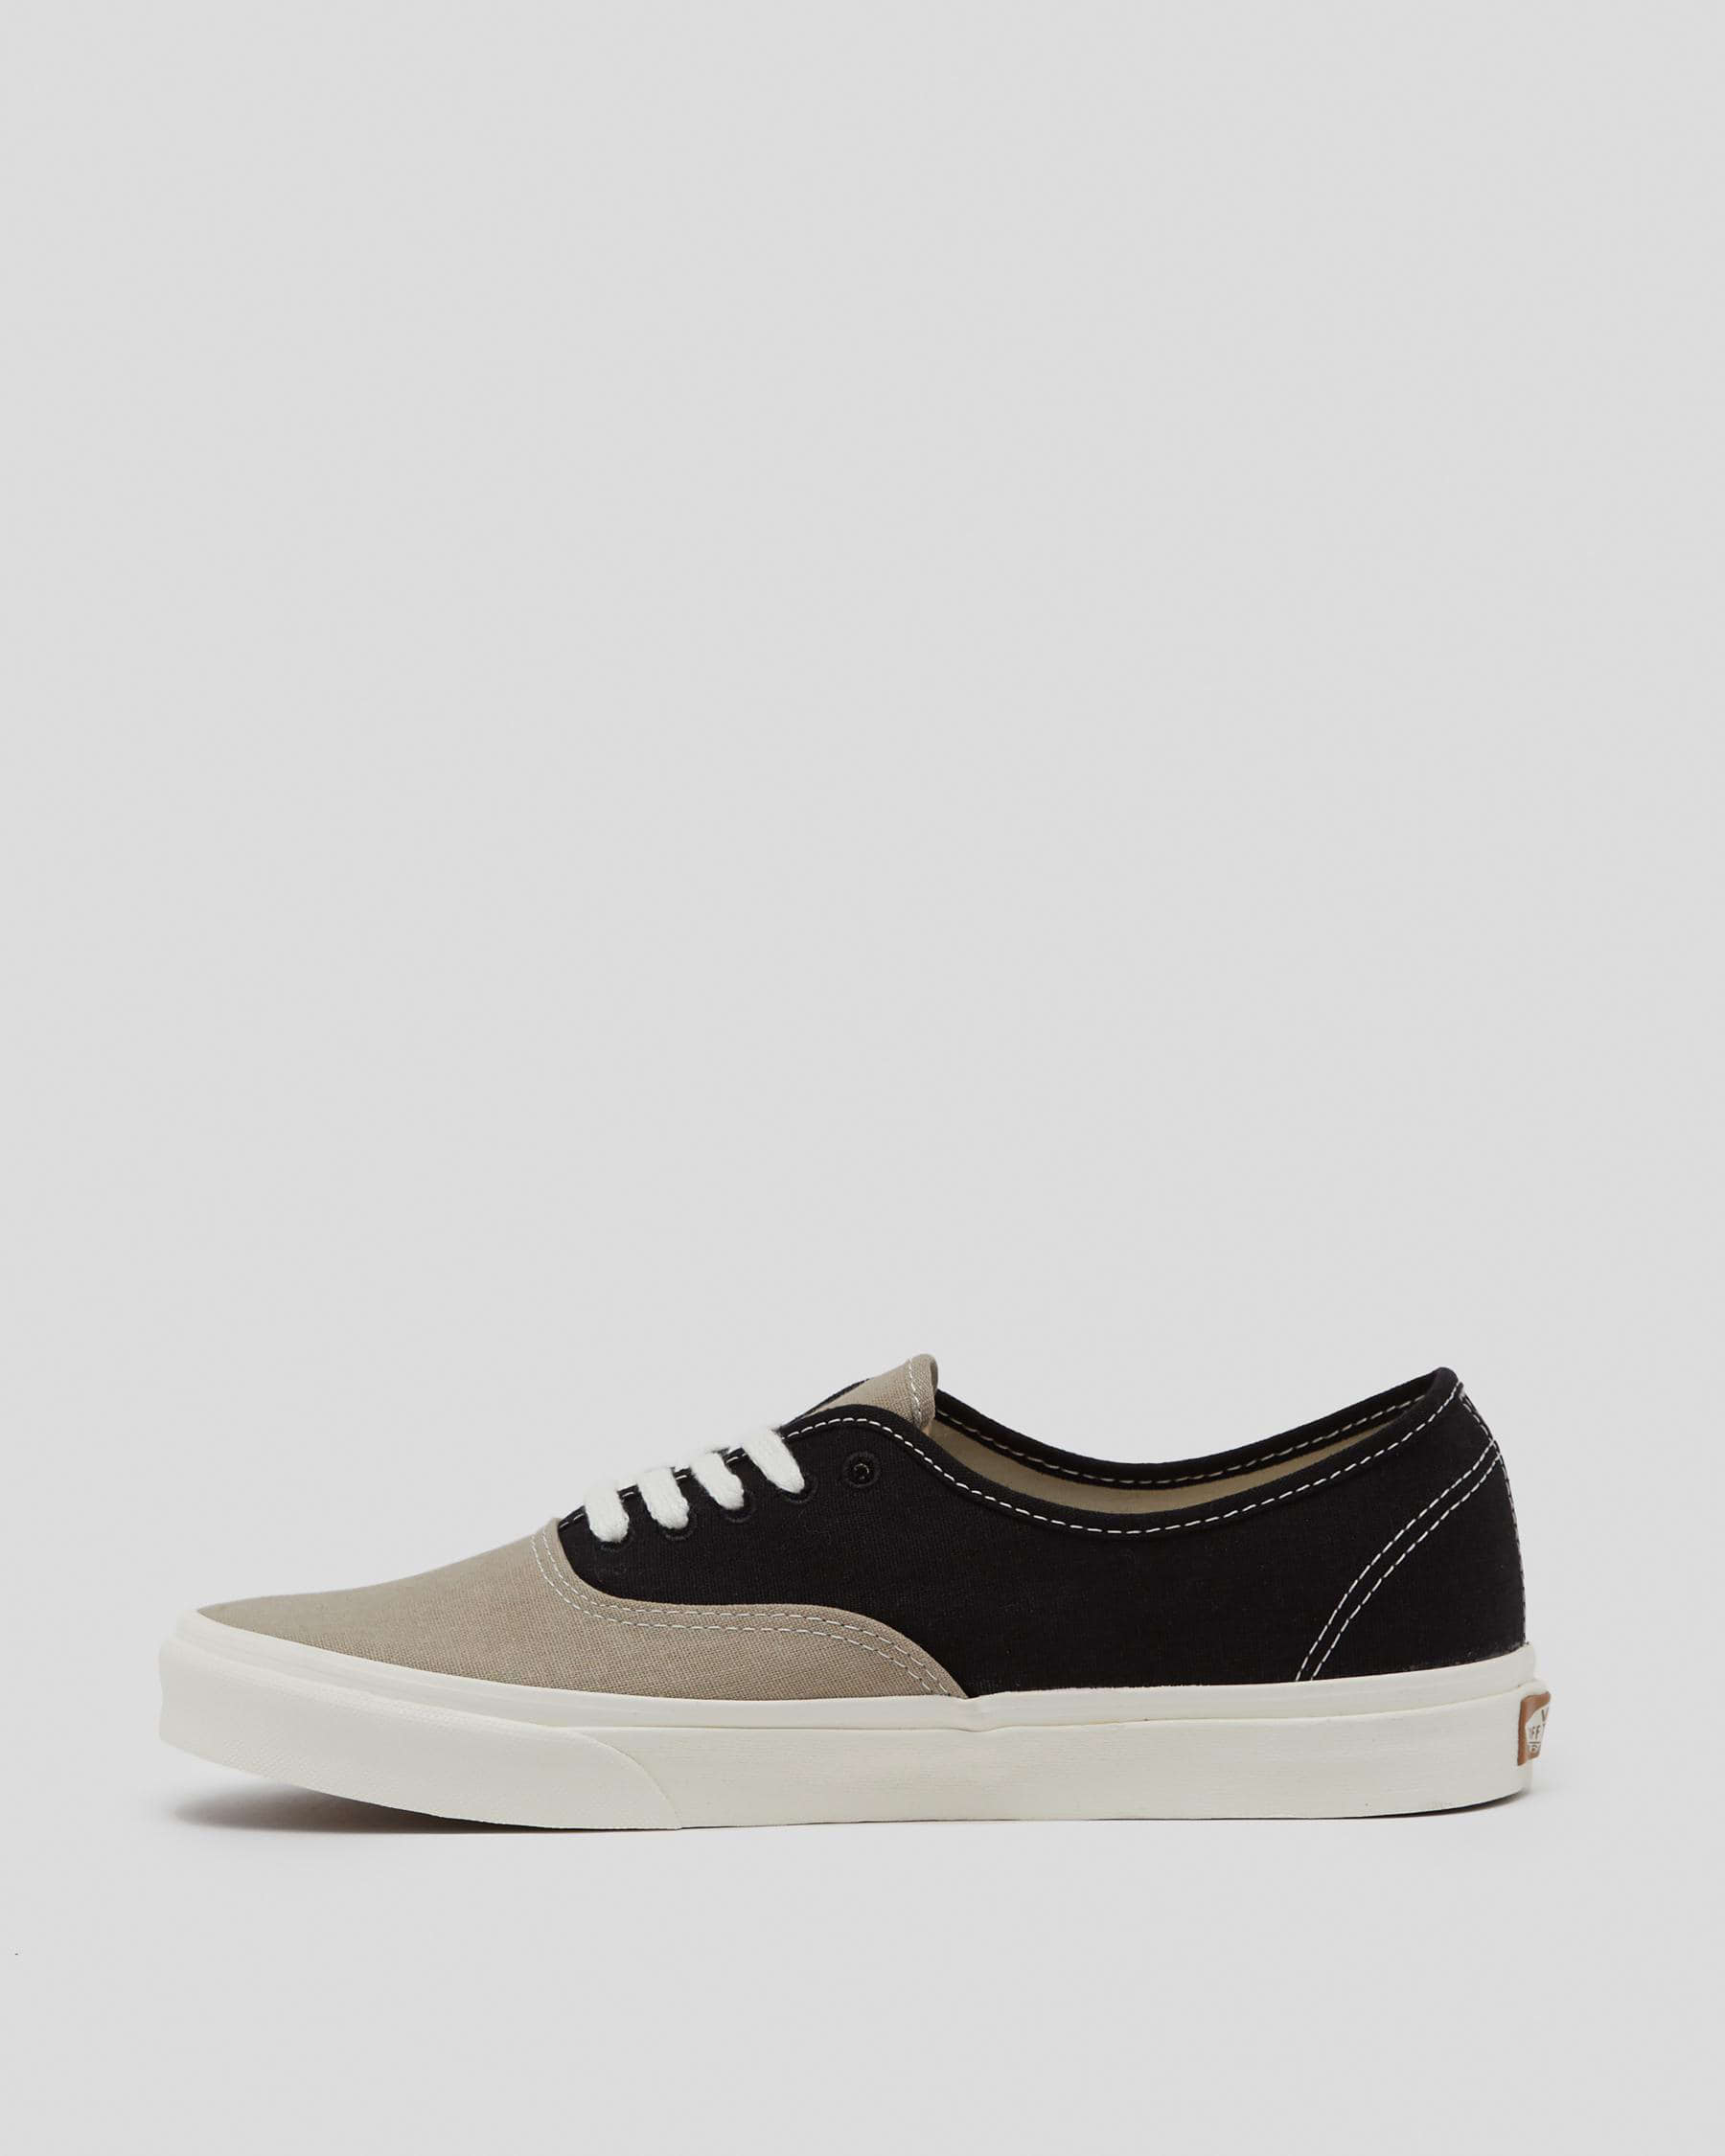 Vans Authentic Shoes In Eco Theory Multi Block Black - Fast Shipping ...